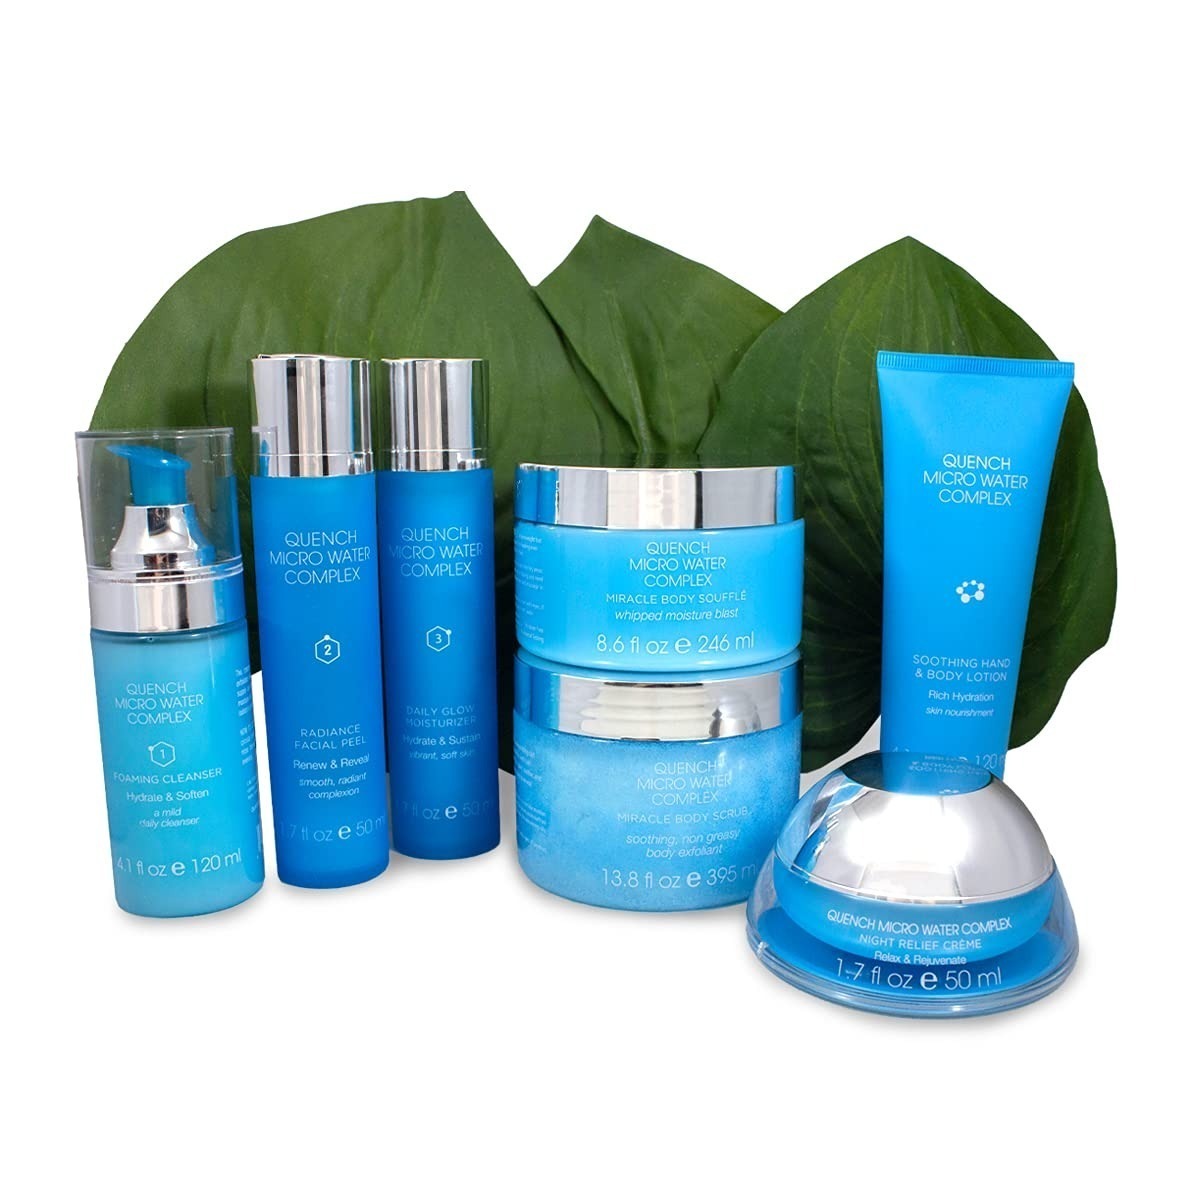 Quench 7 Piece Micro Water Skin Care Set $20 + Free Shipping w/ Prime or orders $35+